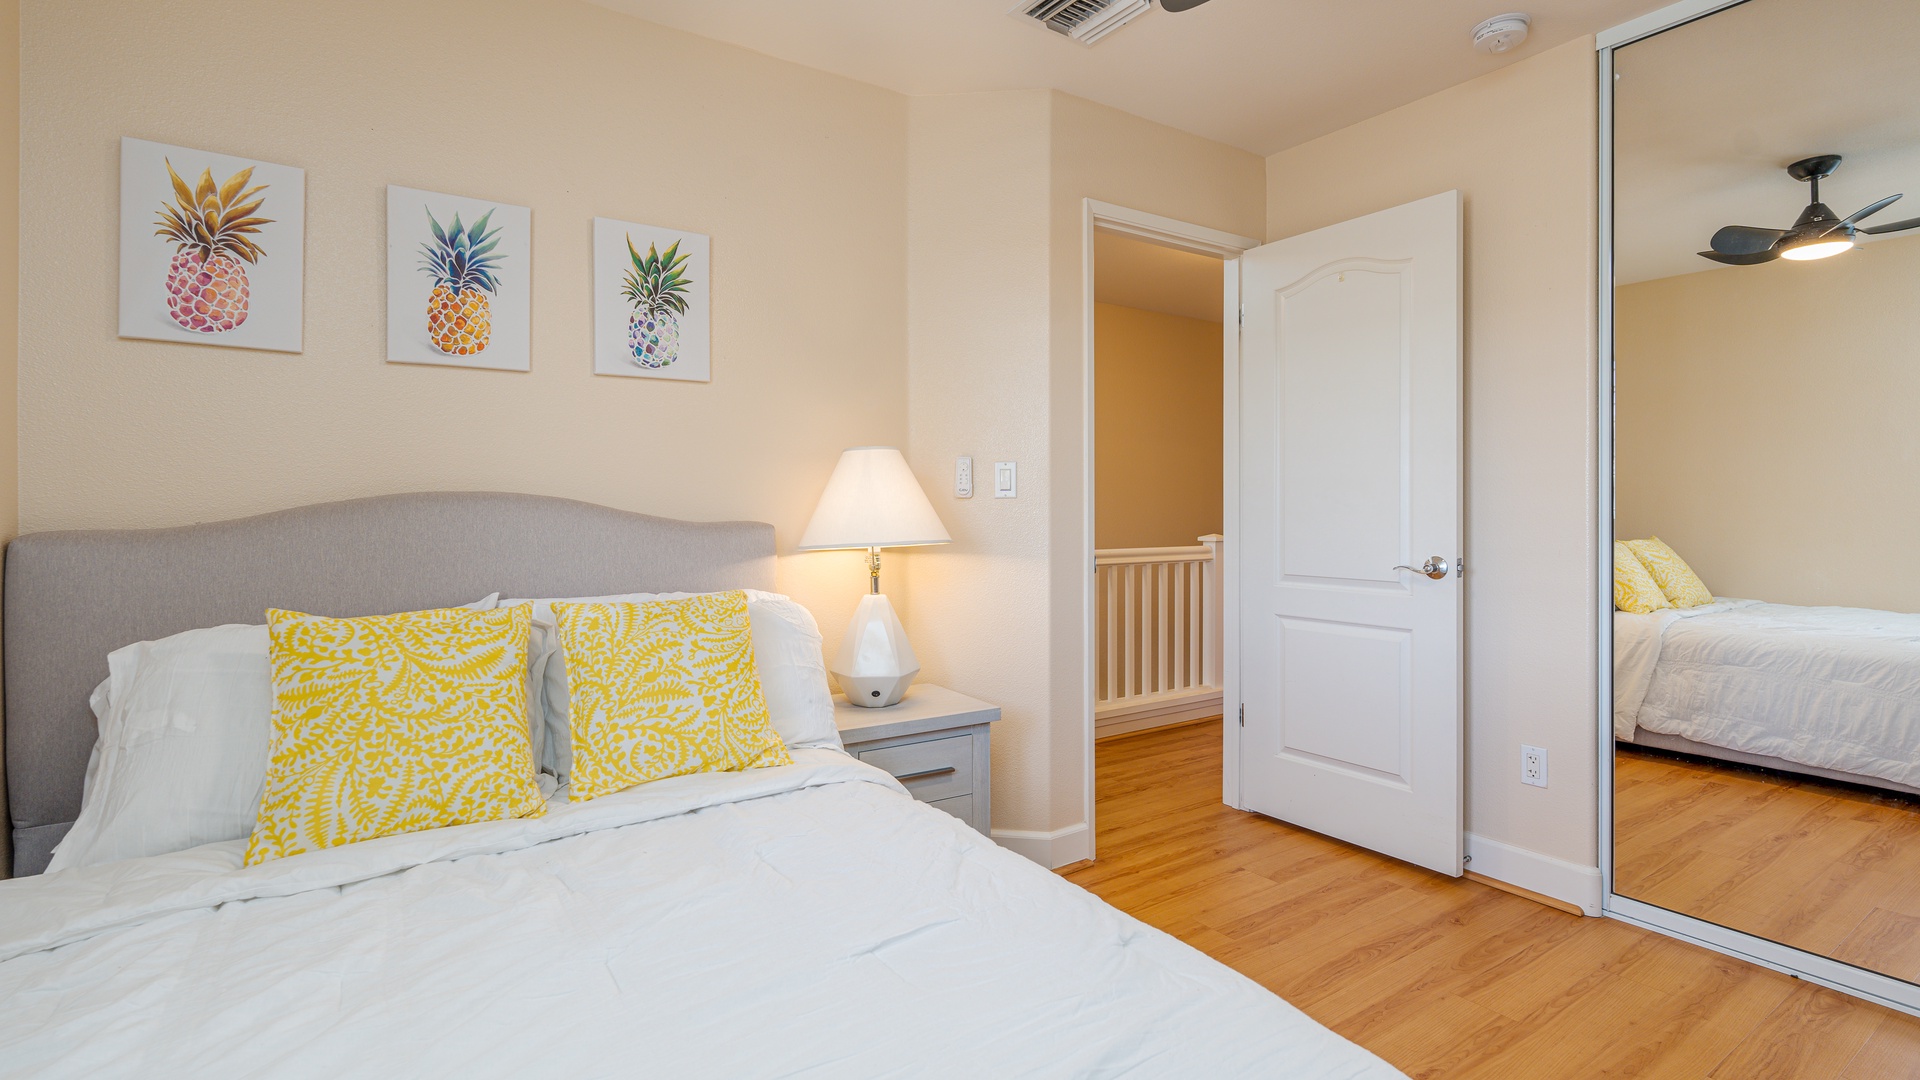 Kapolei Vacation Rentals, Hillside Villas 1496-2 - The third guest bedroom with bright accents and soft lighting.